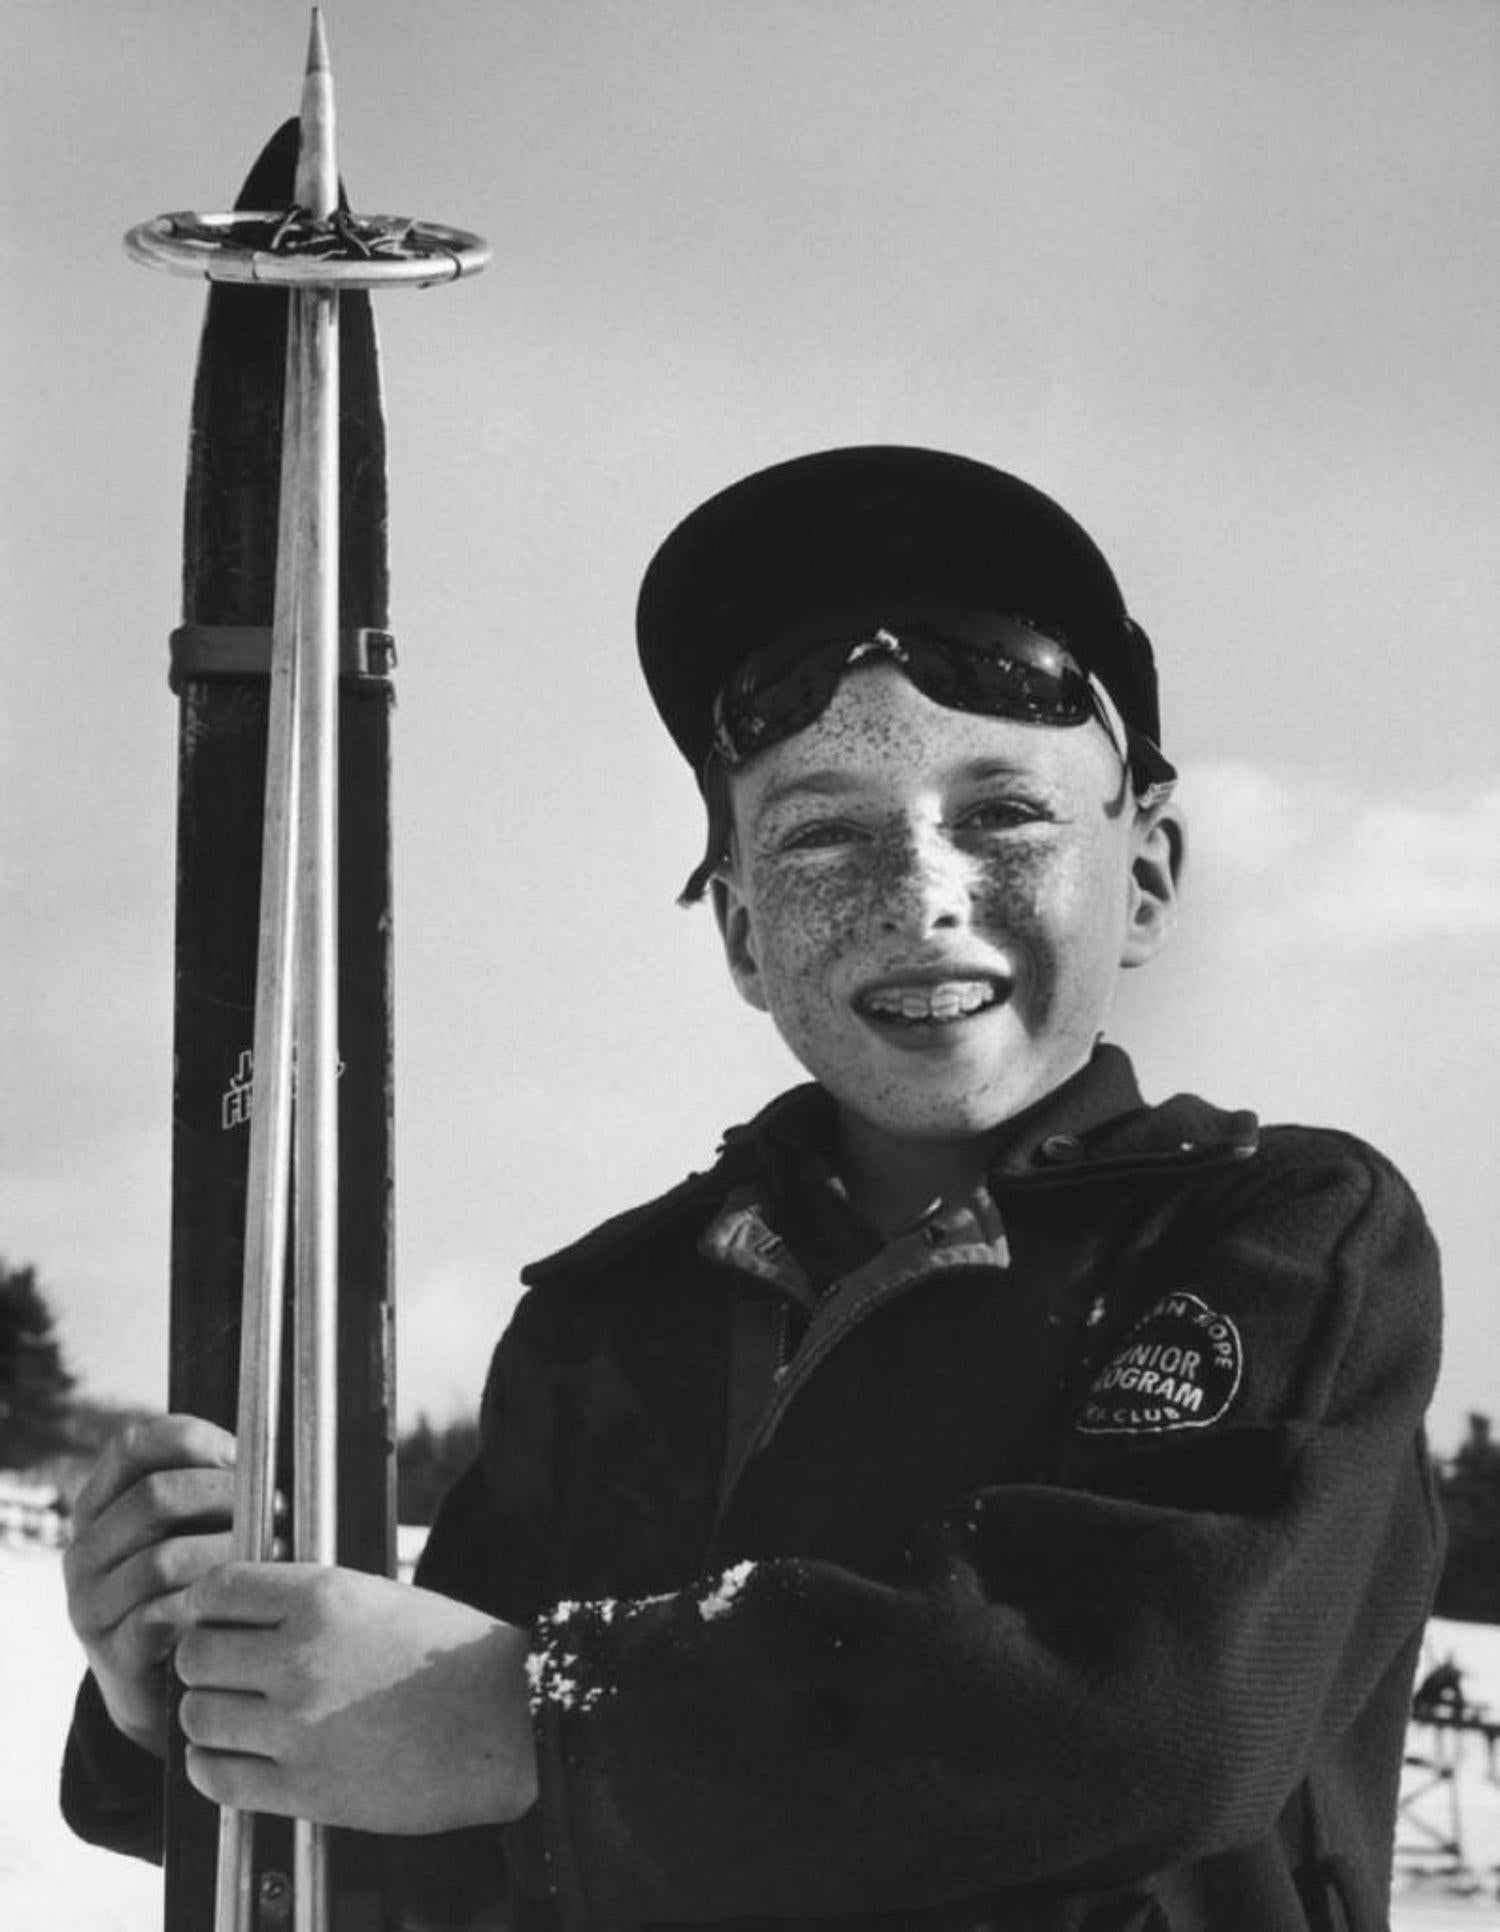 'Junior Skier (New England Skiing)' 1955 Slim Aarons Limited Estate Edition

A freckled member of the Junior Skiing Program in North Conway, New Hampshire, 1955. 

Silver Gelatin Fibre Print
Produced from the original negative
Certificate of